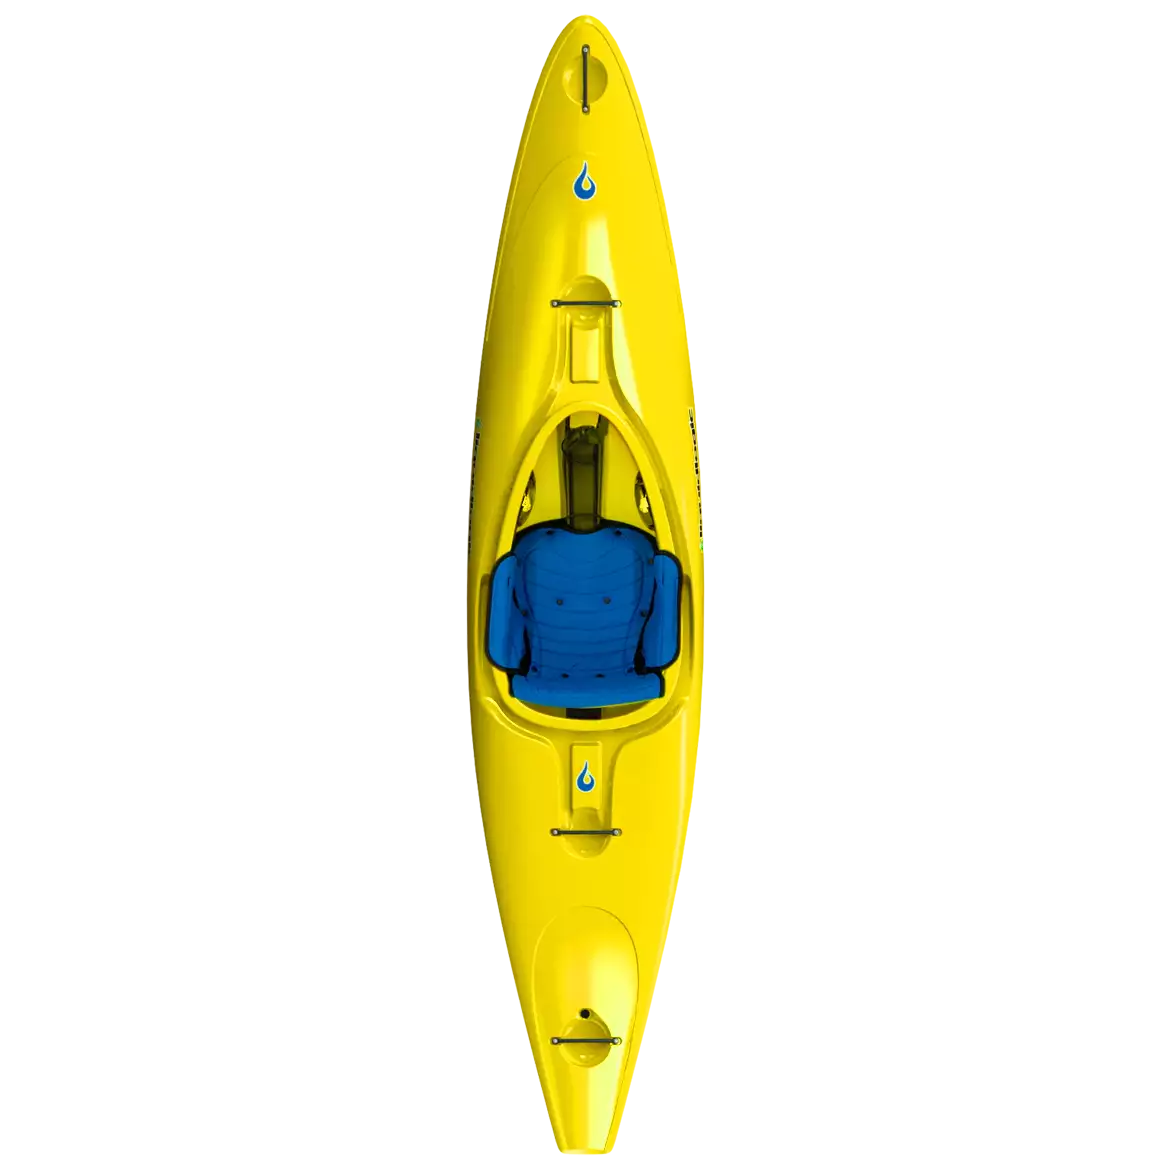 A yellow LiquidLogic Powerslide kayak with a blue seat viewed from above, displayed against a white background with yellow vertical lines.